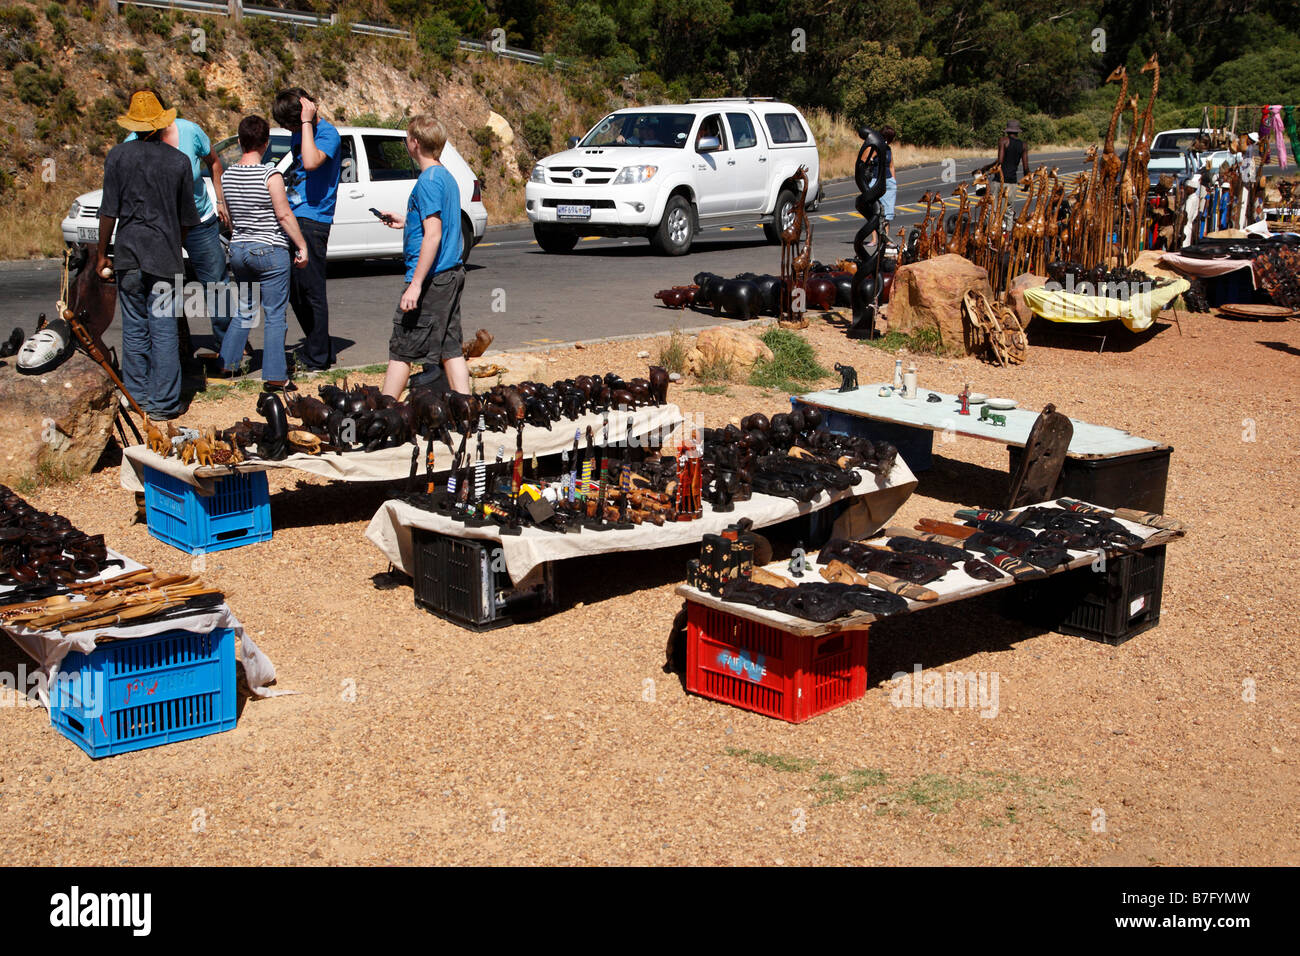 local crafts being sold at the roadside along the M6 near llandudno cape town south africa Stock Photo